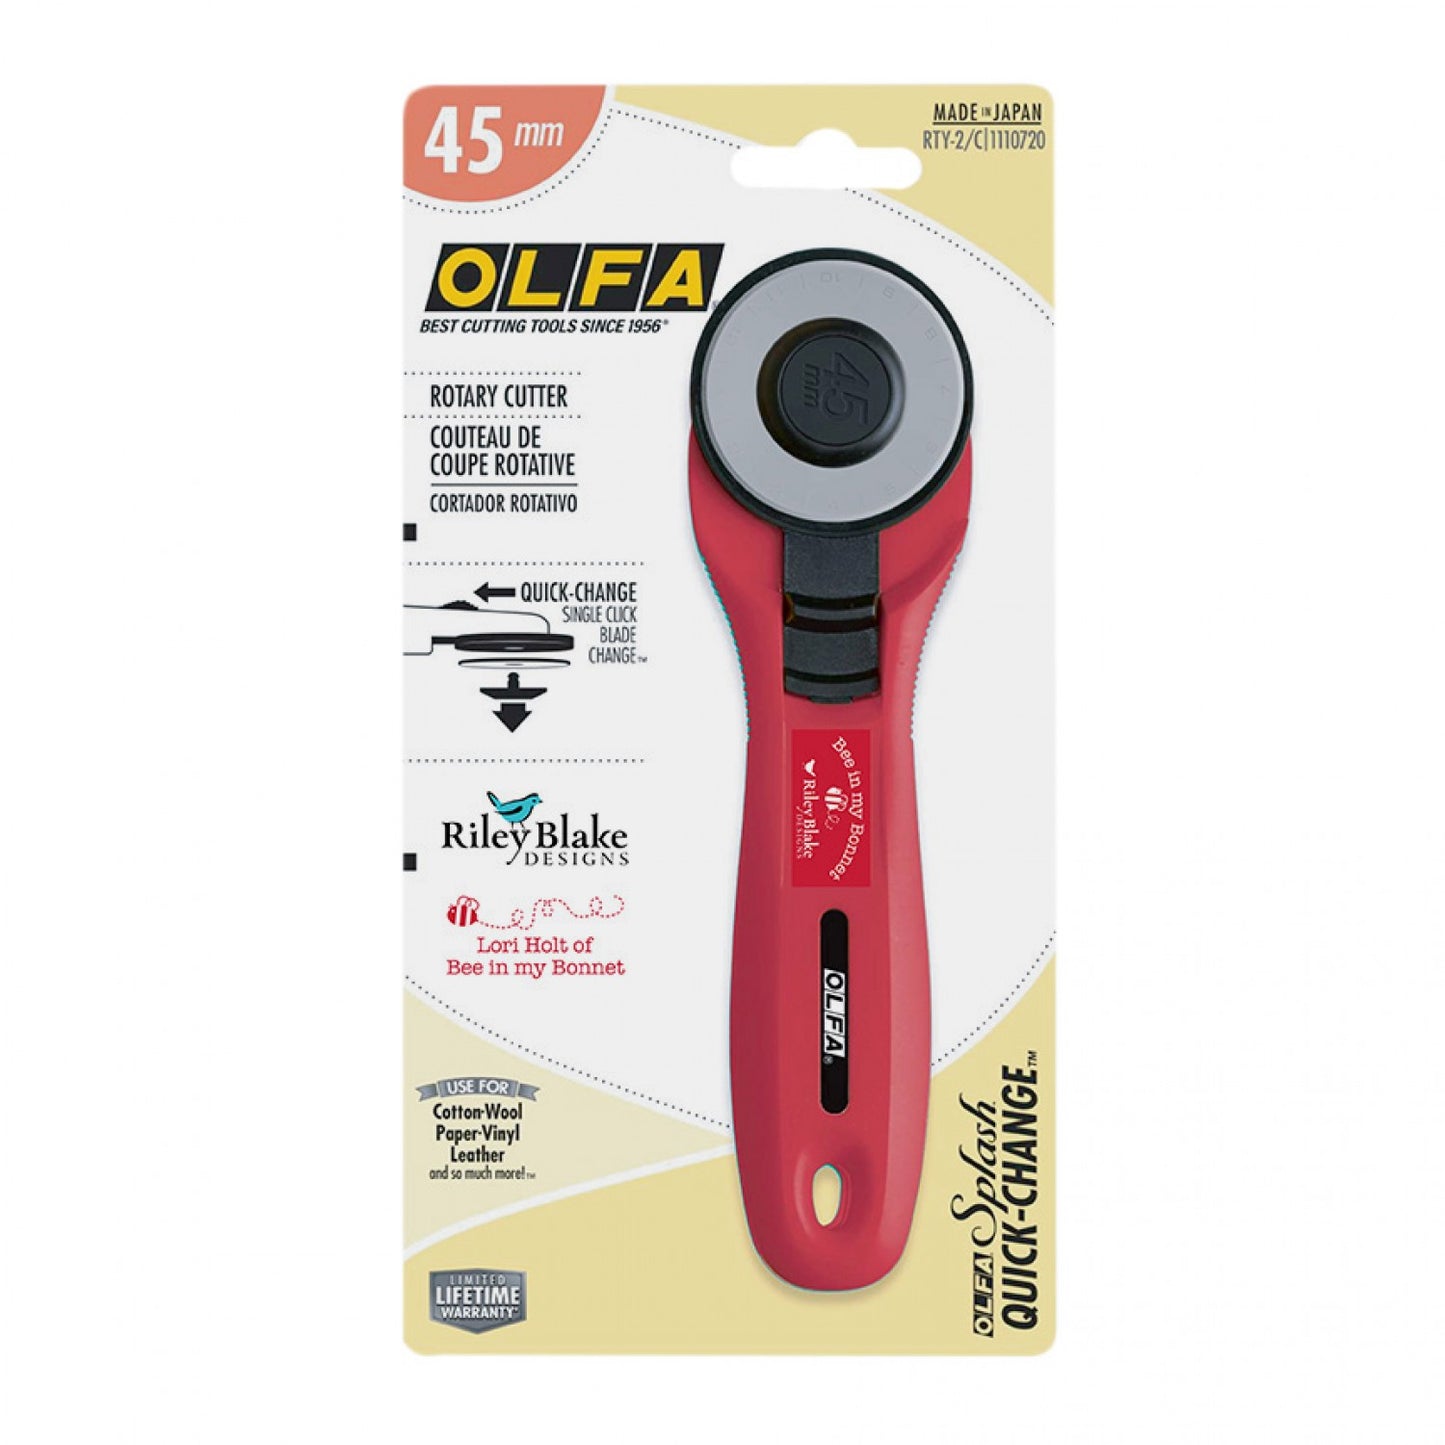 The Olfa Quick Change 45mm Rotary Cutter is the best option for quick fabric cutting in all of your sewing, quilting and crafting projects. The popular 45mm blade is manufactured with tungsten steel for a long lasting sharp edge.  Featuring Lori Holt's signature red color. Easily cuts through up to 8 layers of cotton fabric at a time. A comfortable contoured rotary handle. Anti-slip textured grooves on either side of the handle for a safe and secure grip. 